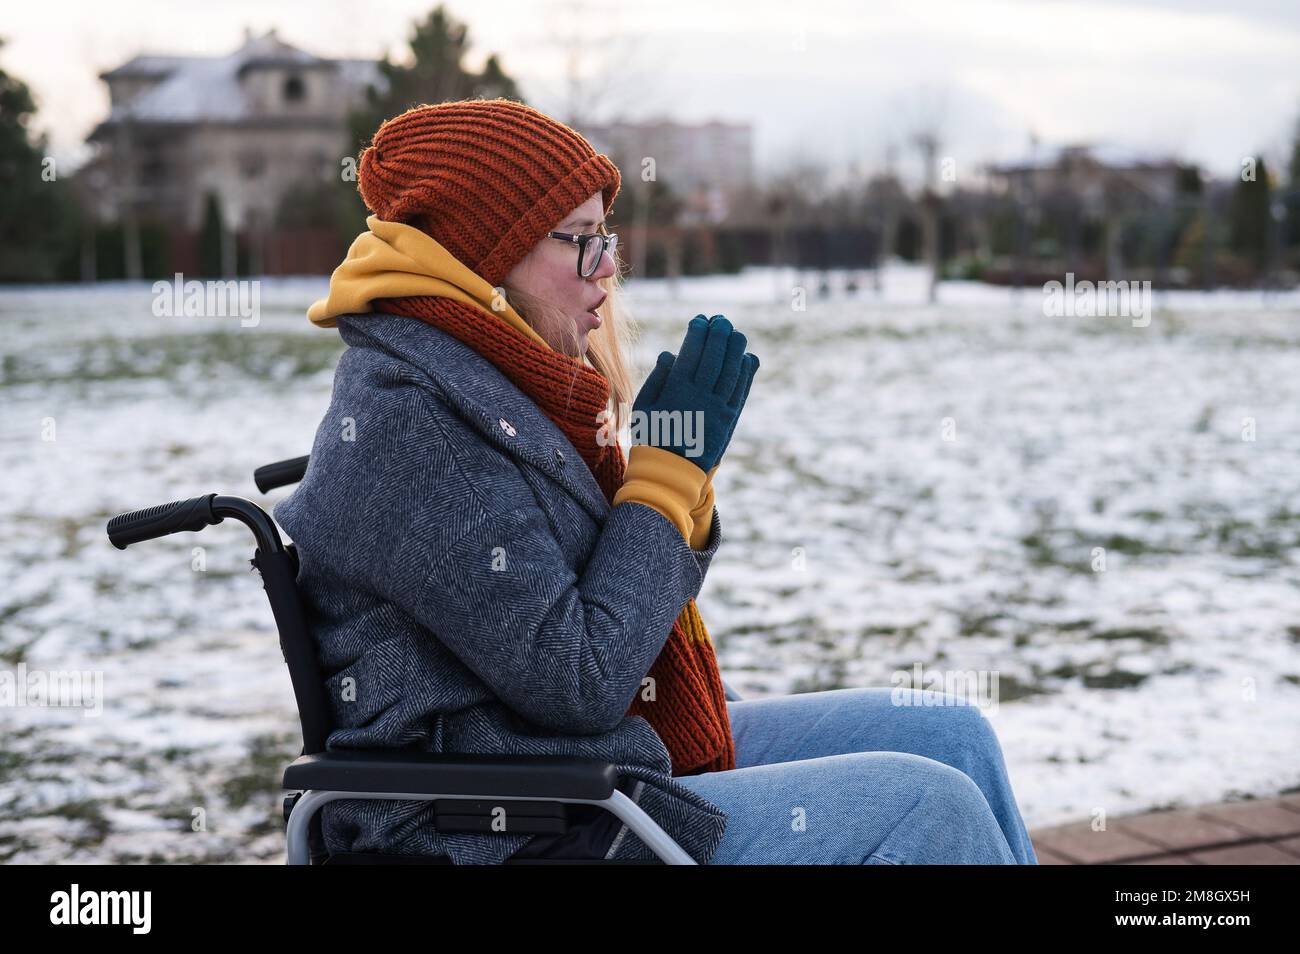 Caucasian woman freezes in a wheelchair in winter. Stock Photo